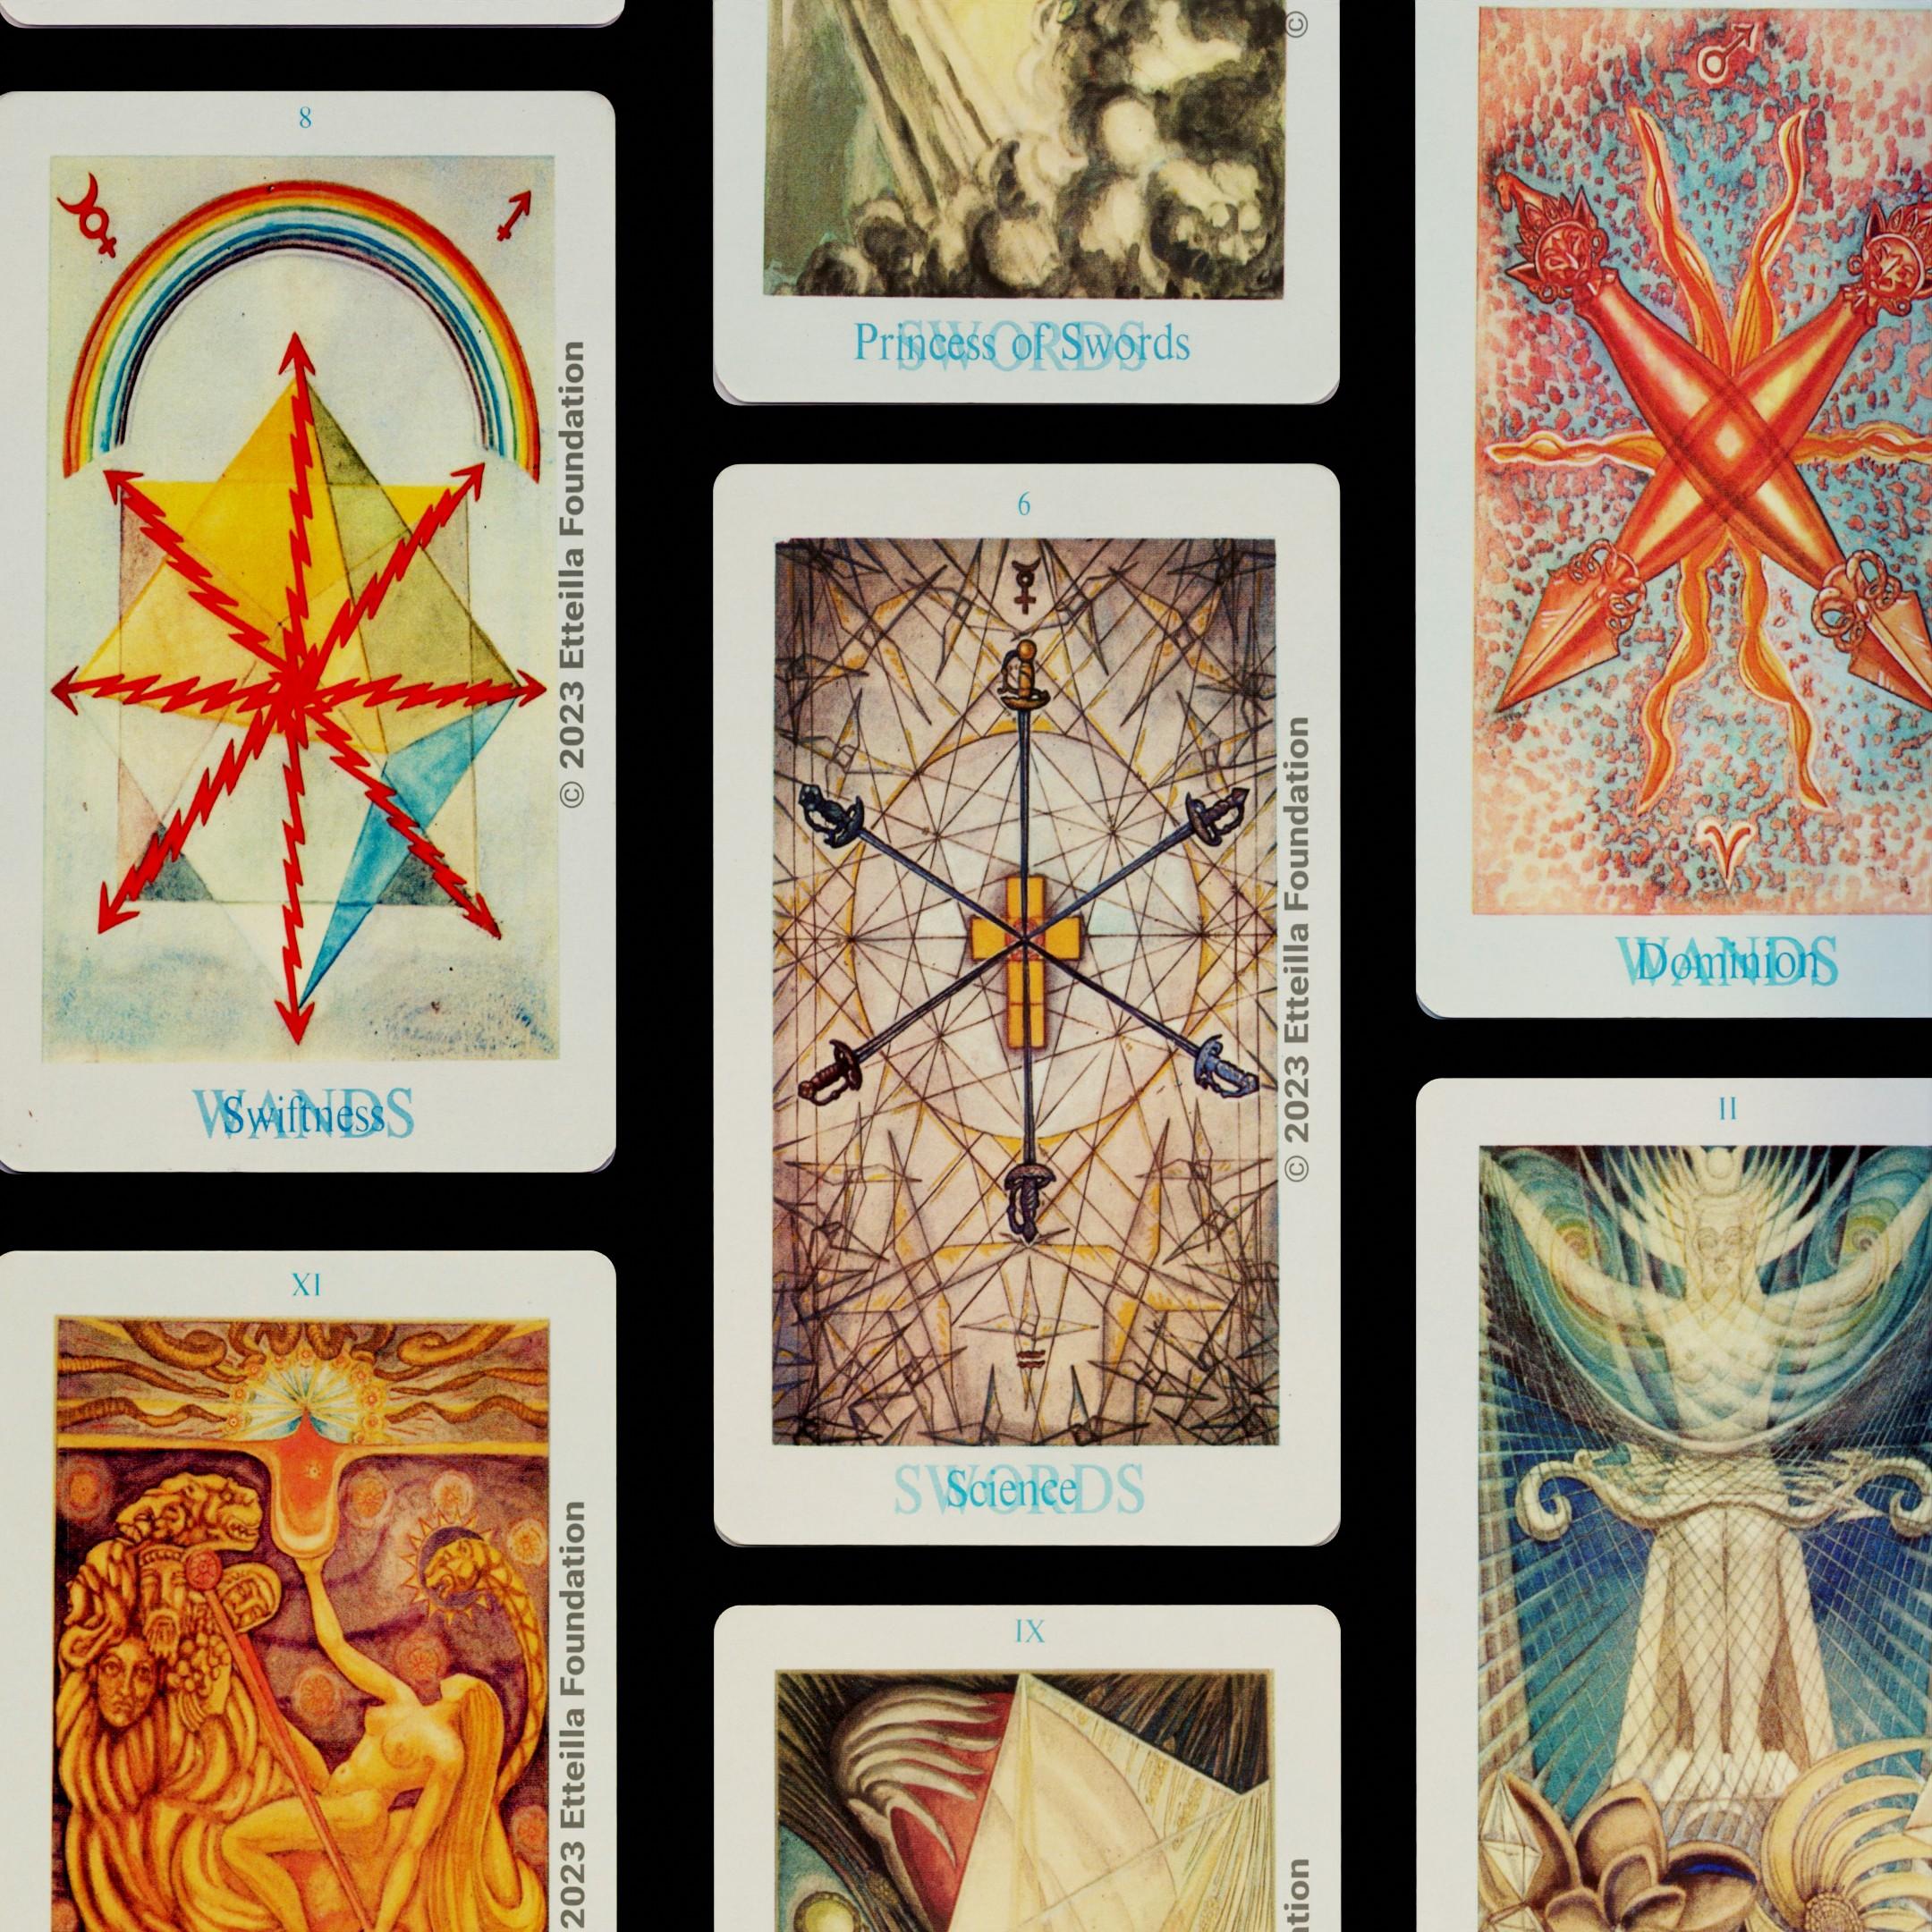 New Deck: Crowley's Thoth Tarot